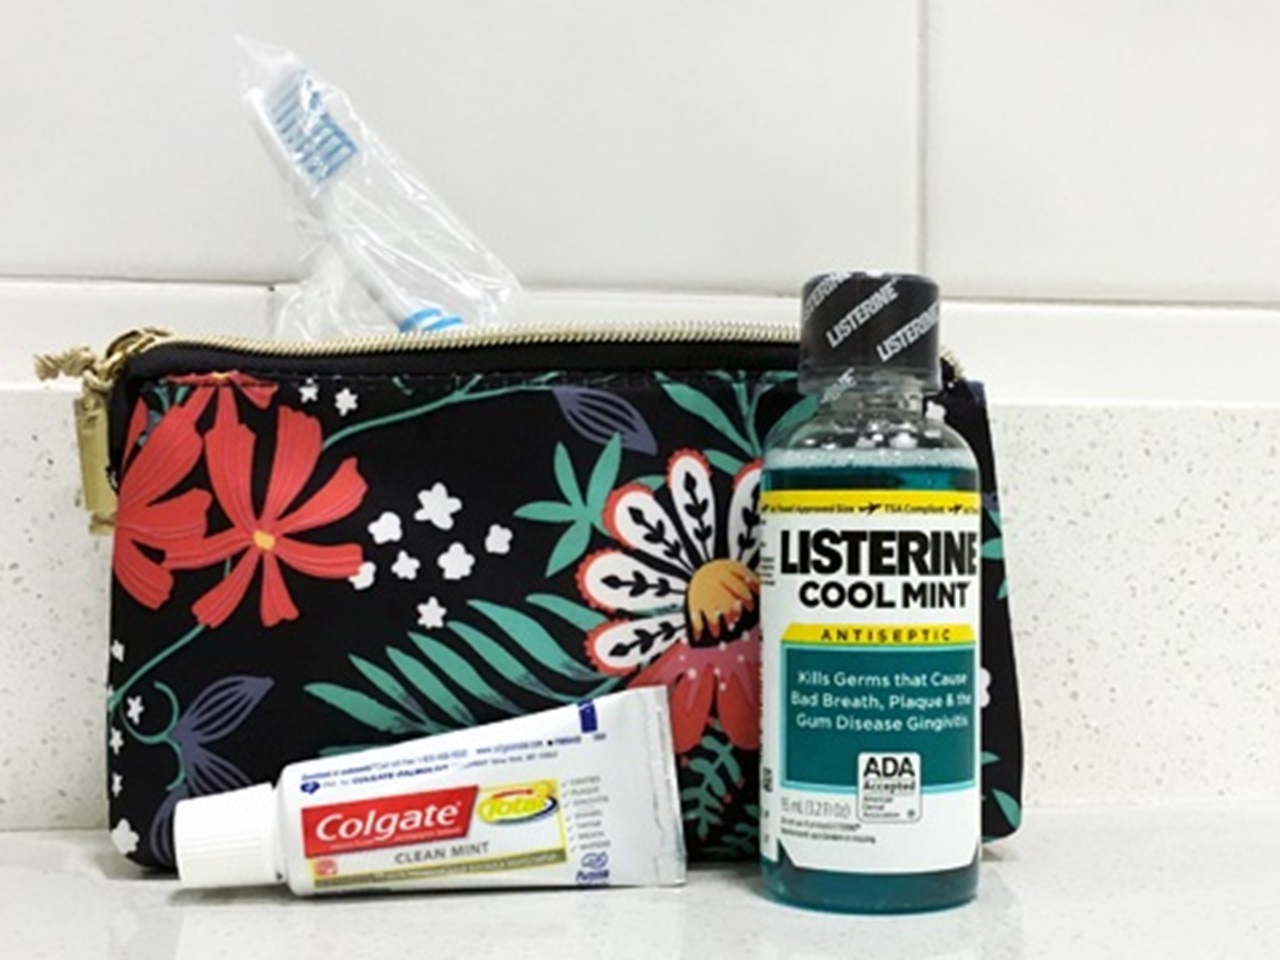 Travel bag with ADA Seal products